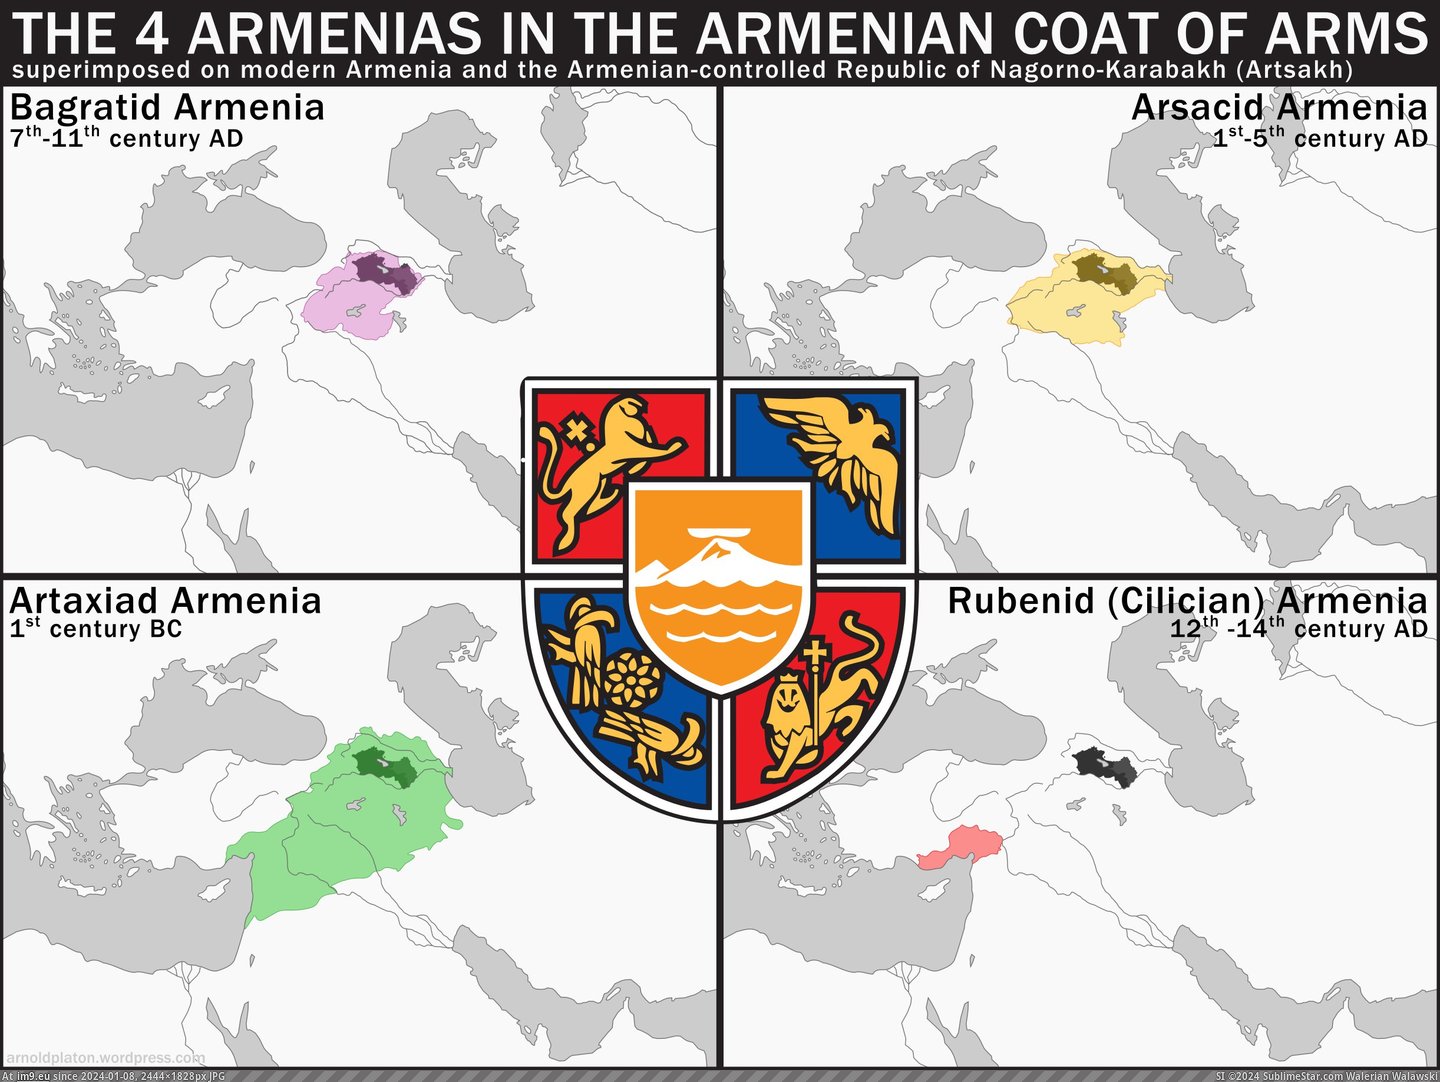 #States #Arms #Armenia #Superimposed #Coat #Armenian [Mapporn] The 4 Armenian states referenced in the Coat of Arms of Armenian (superimposed on Armenia and the unrecognized Nagorno Pic. (Obraz z album My r/MAPS favs))